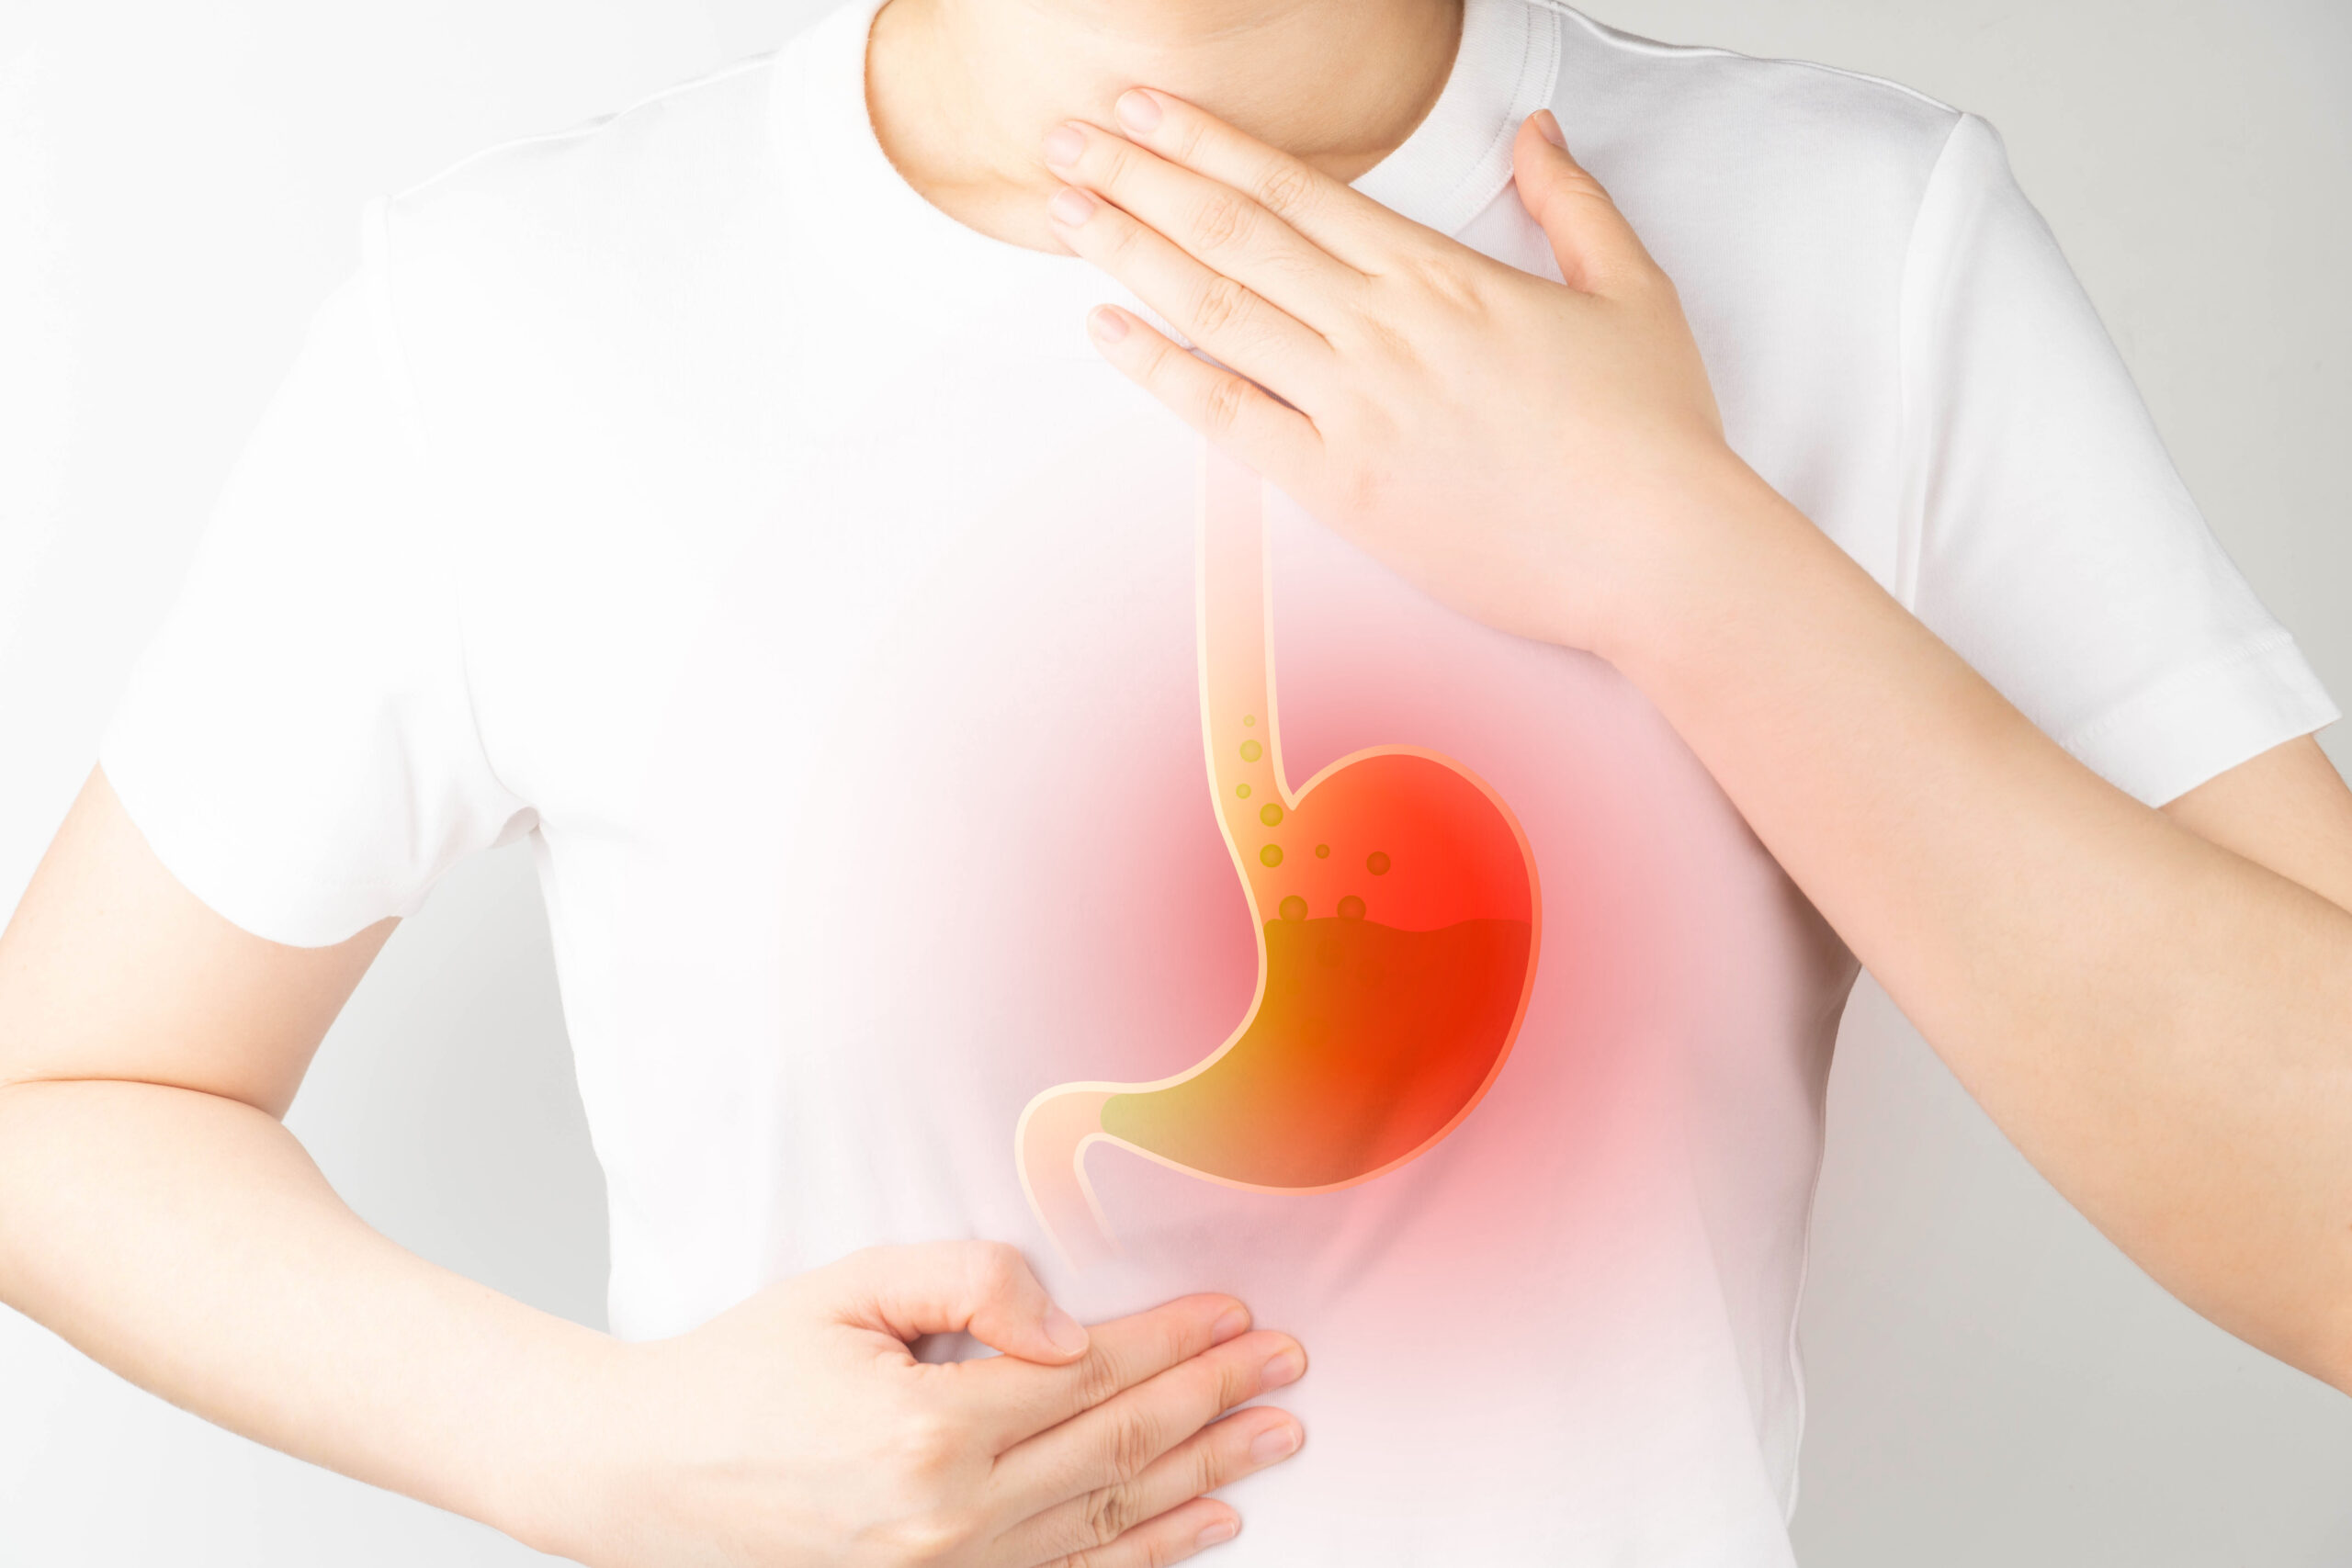 Esophagitis: What Is, Types, Symptoms, and Treatment